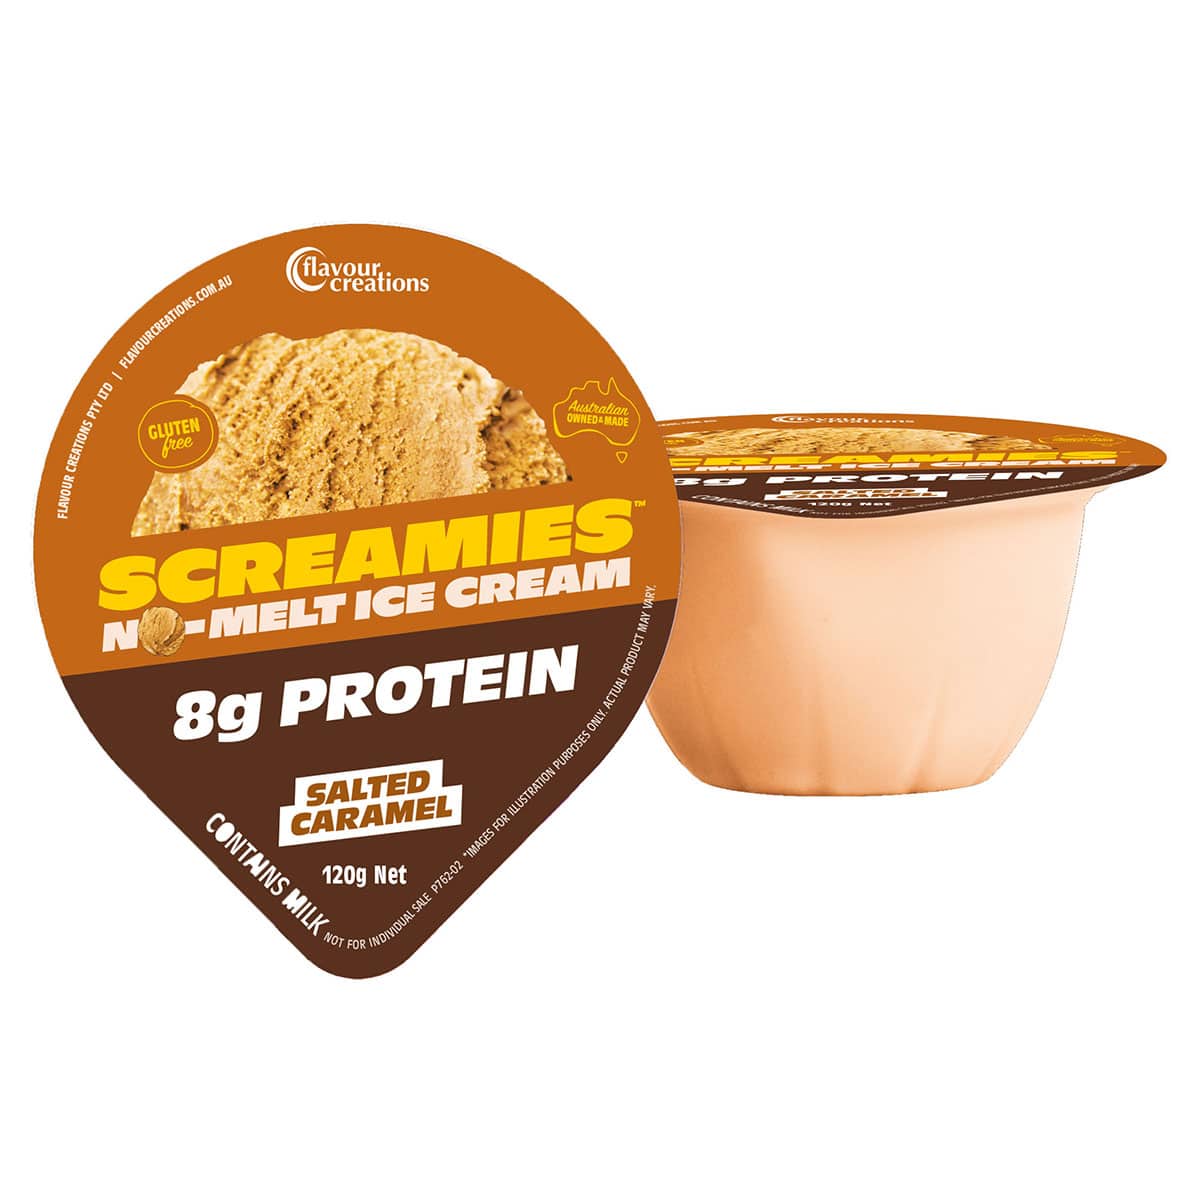 Flavour Creations Carton of 36 Screamies No Melt Ice Cream Protein Salted Caramel FLAPROSCIC__CT